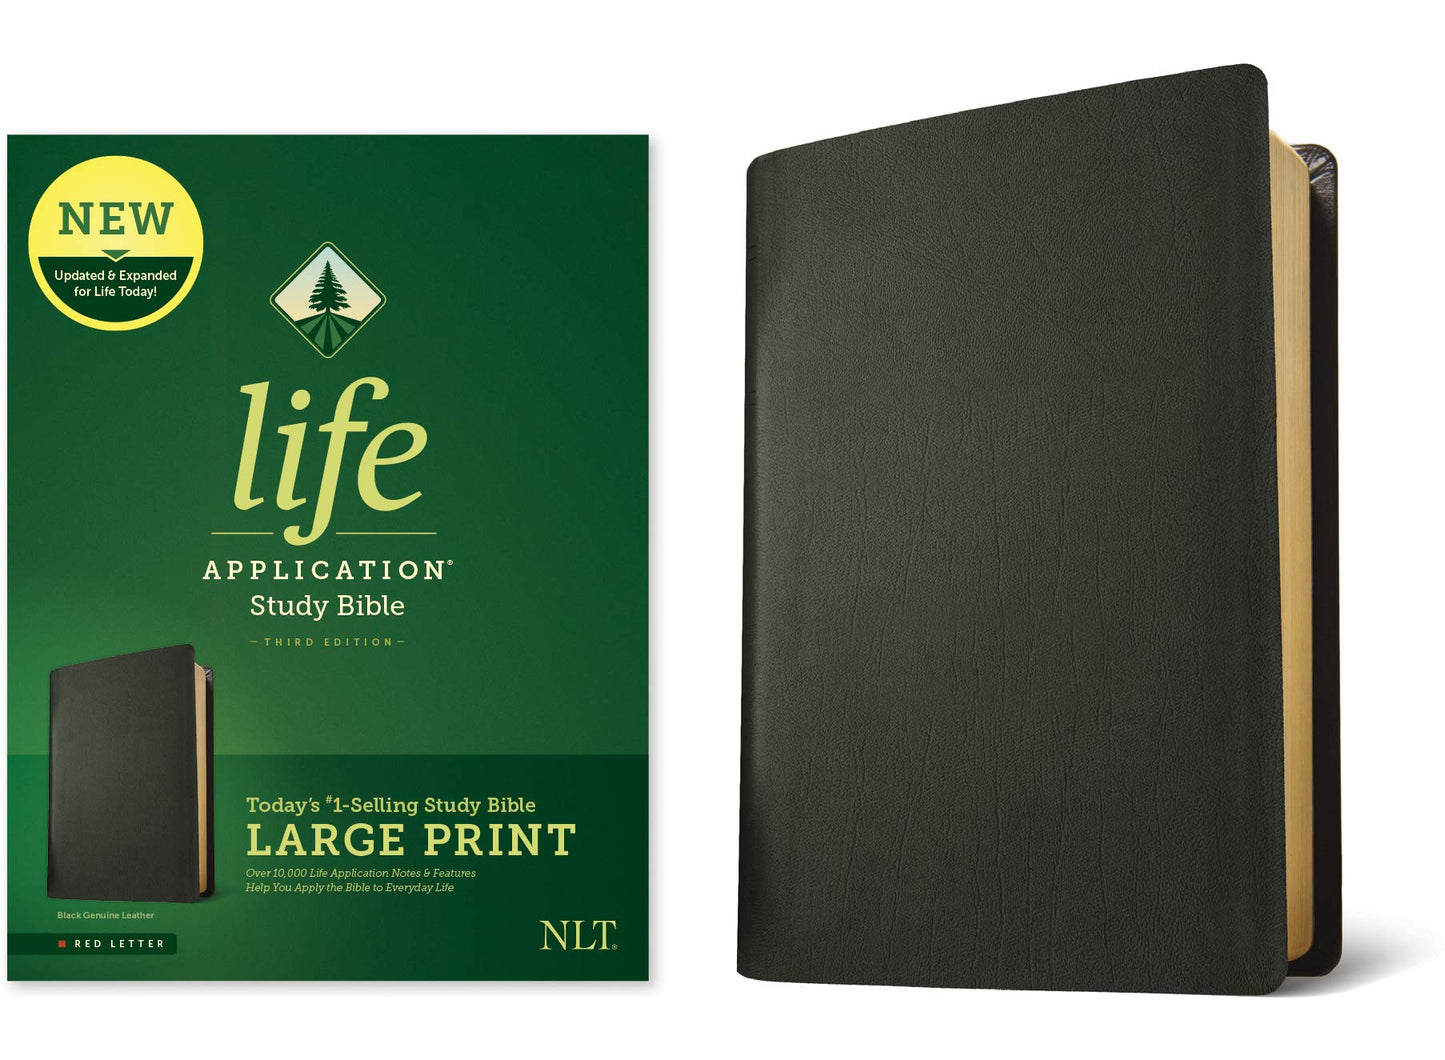 Tyndale NLT Life Application Study Bible, Third Edition, Large Print (Genuine Leather, Black, Red Letter) – New Living Translation Bible, Large Print Study Bible for Enhanced Readability